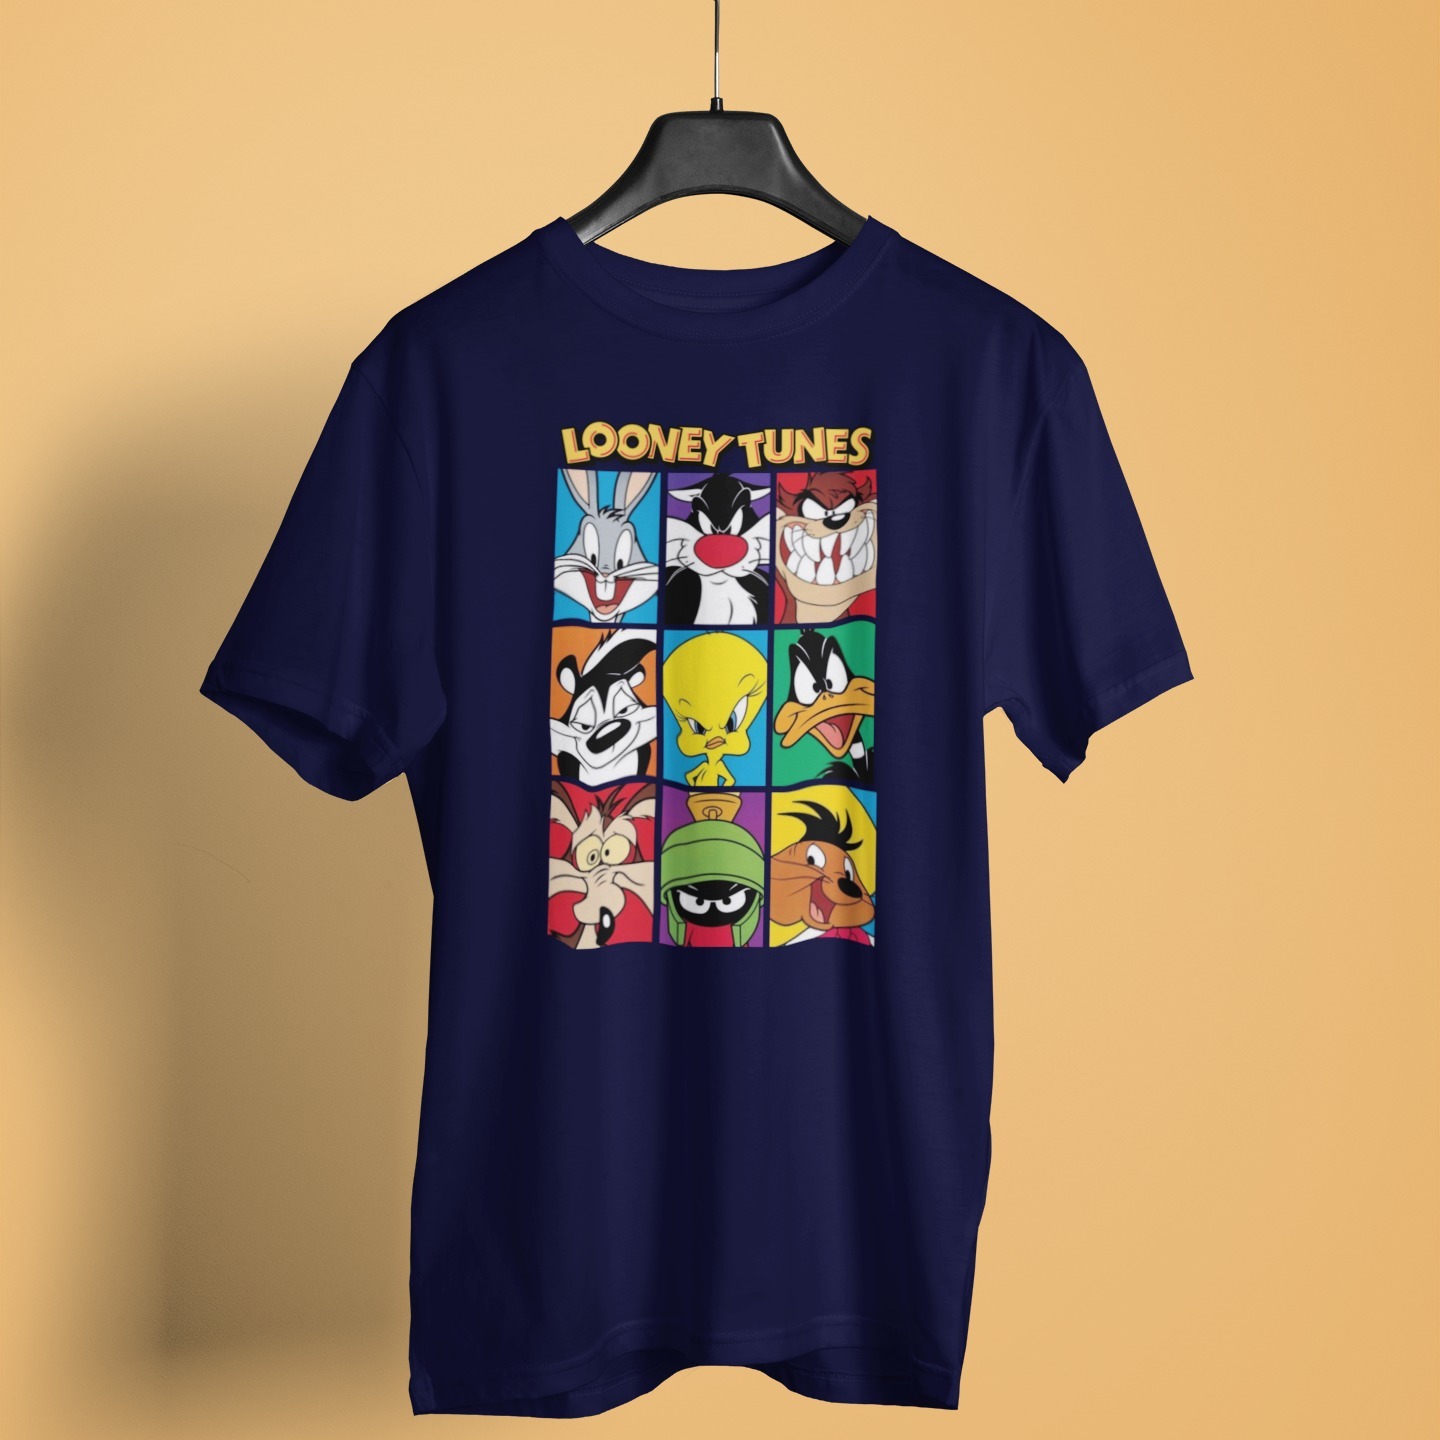 Looney Tunes Collage T-Shirt for Boys